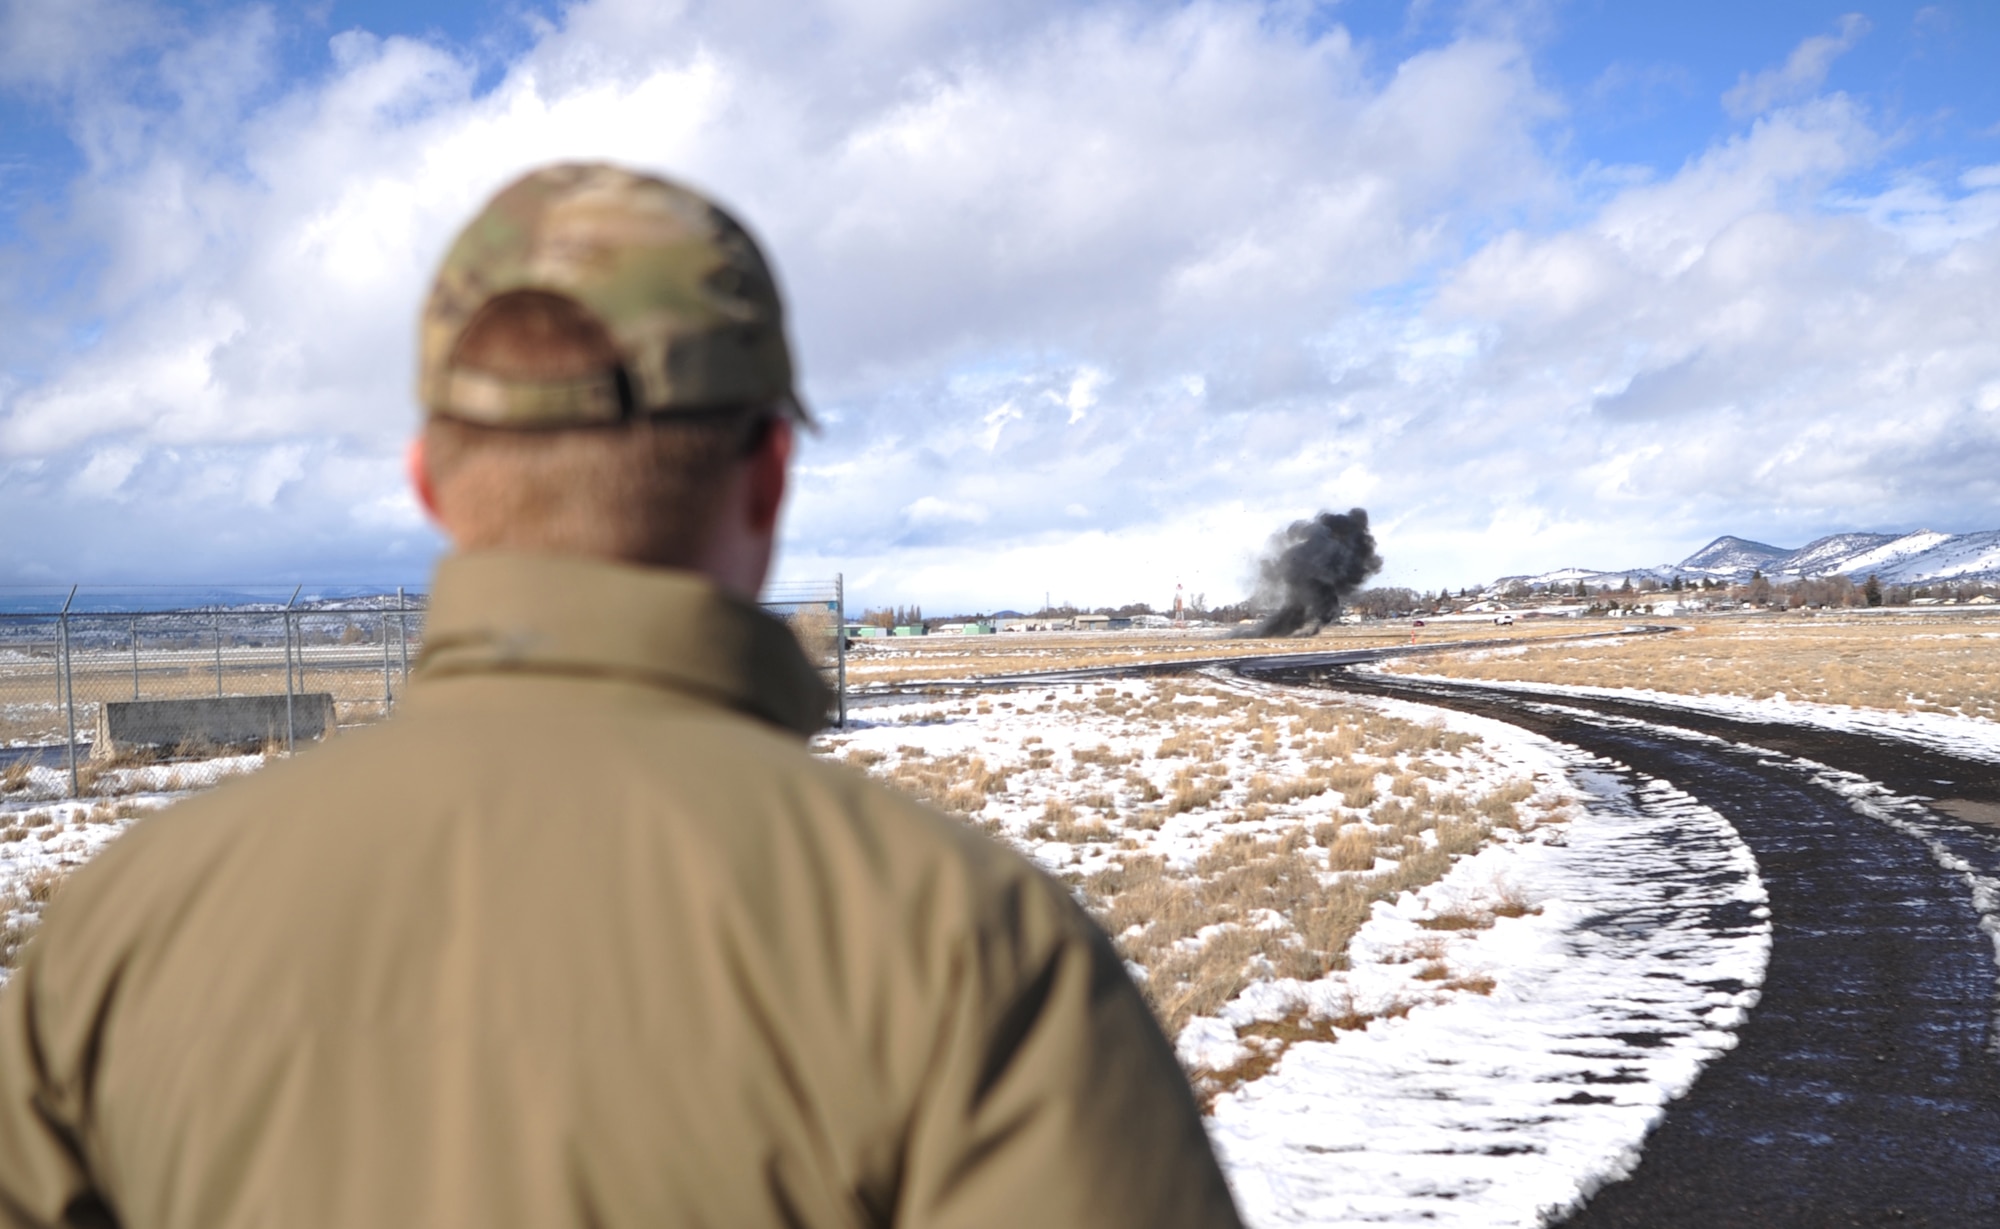 Airman 1st Class Andrew Boyce, 9th Civil Engineer Squadron explosive ordnance disposal technician, observes a flare being detonated via controlled explosion Feb. 7, 2017 at Kingsley Field, Oregon. EOD detonated the flare in an isolated location after all safety precautions were met. (U.S. Air Force photo/Airman Tristan D. Viglianco)